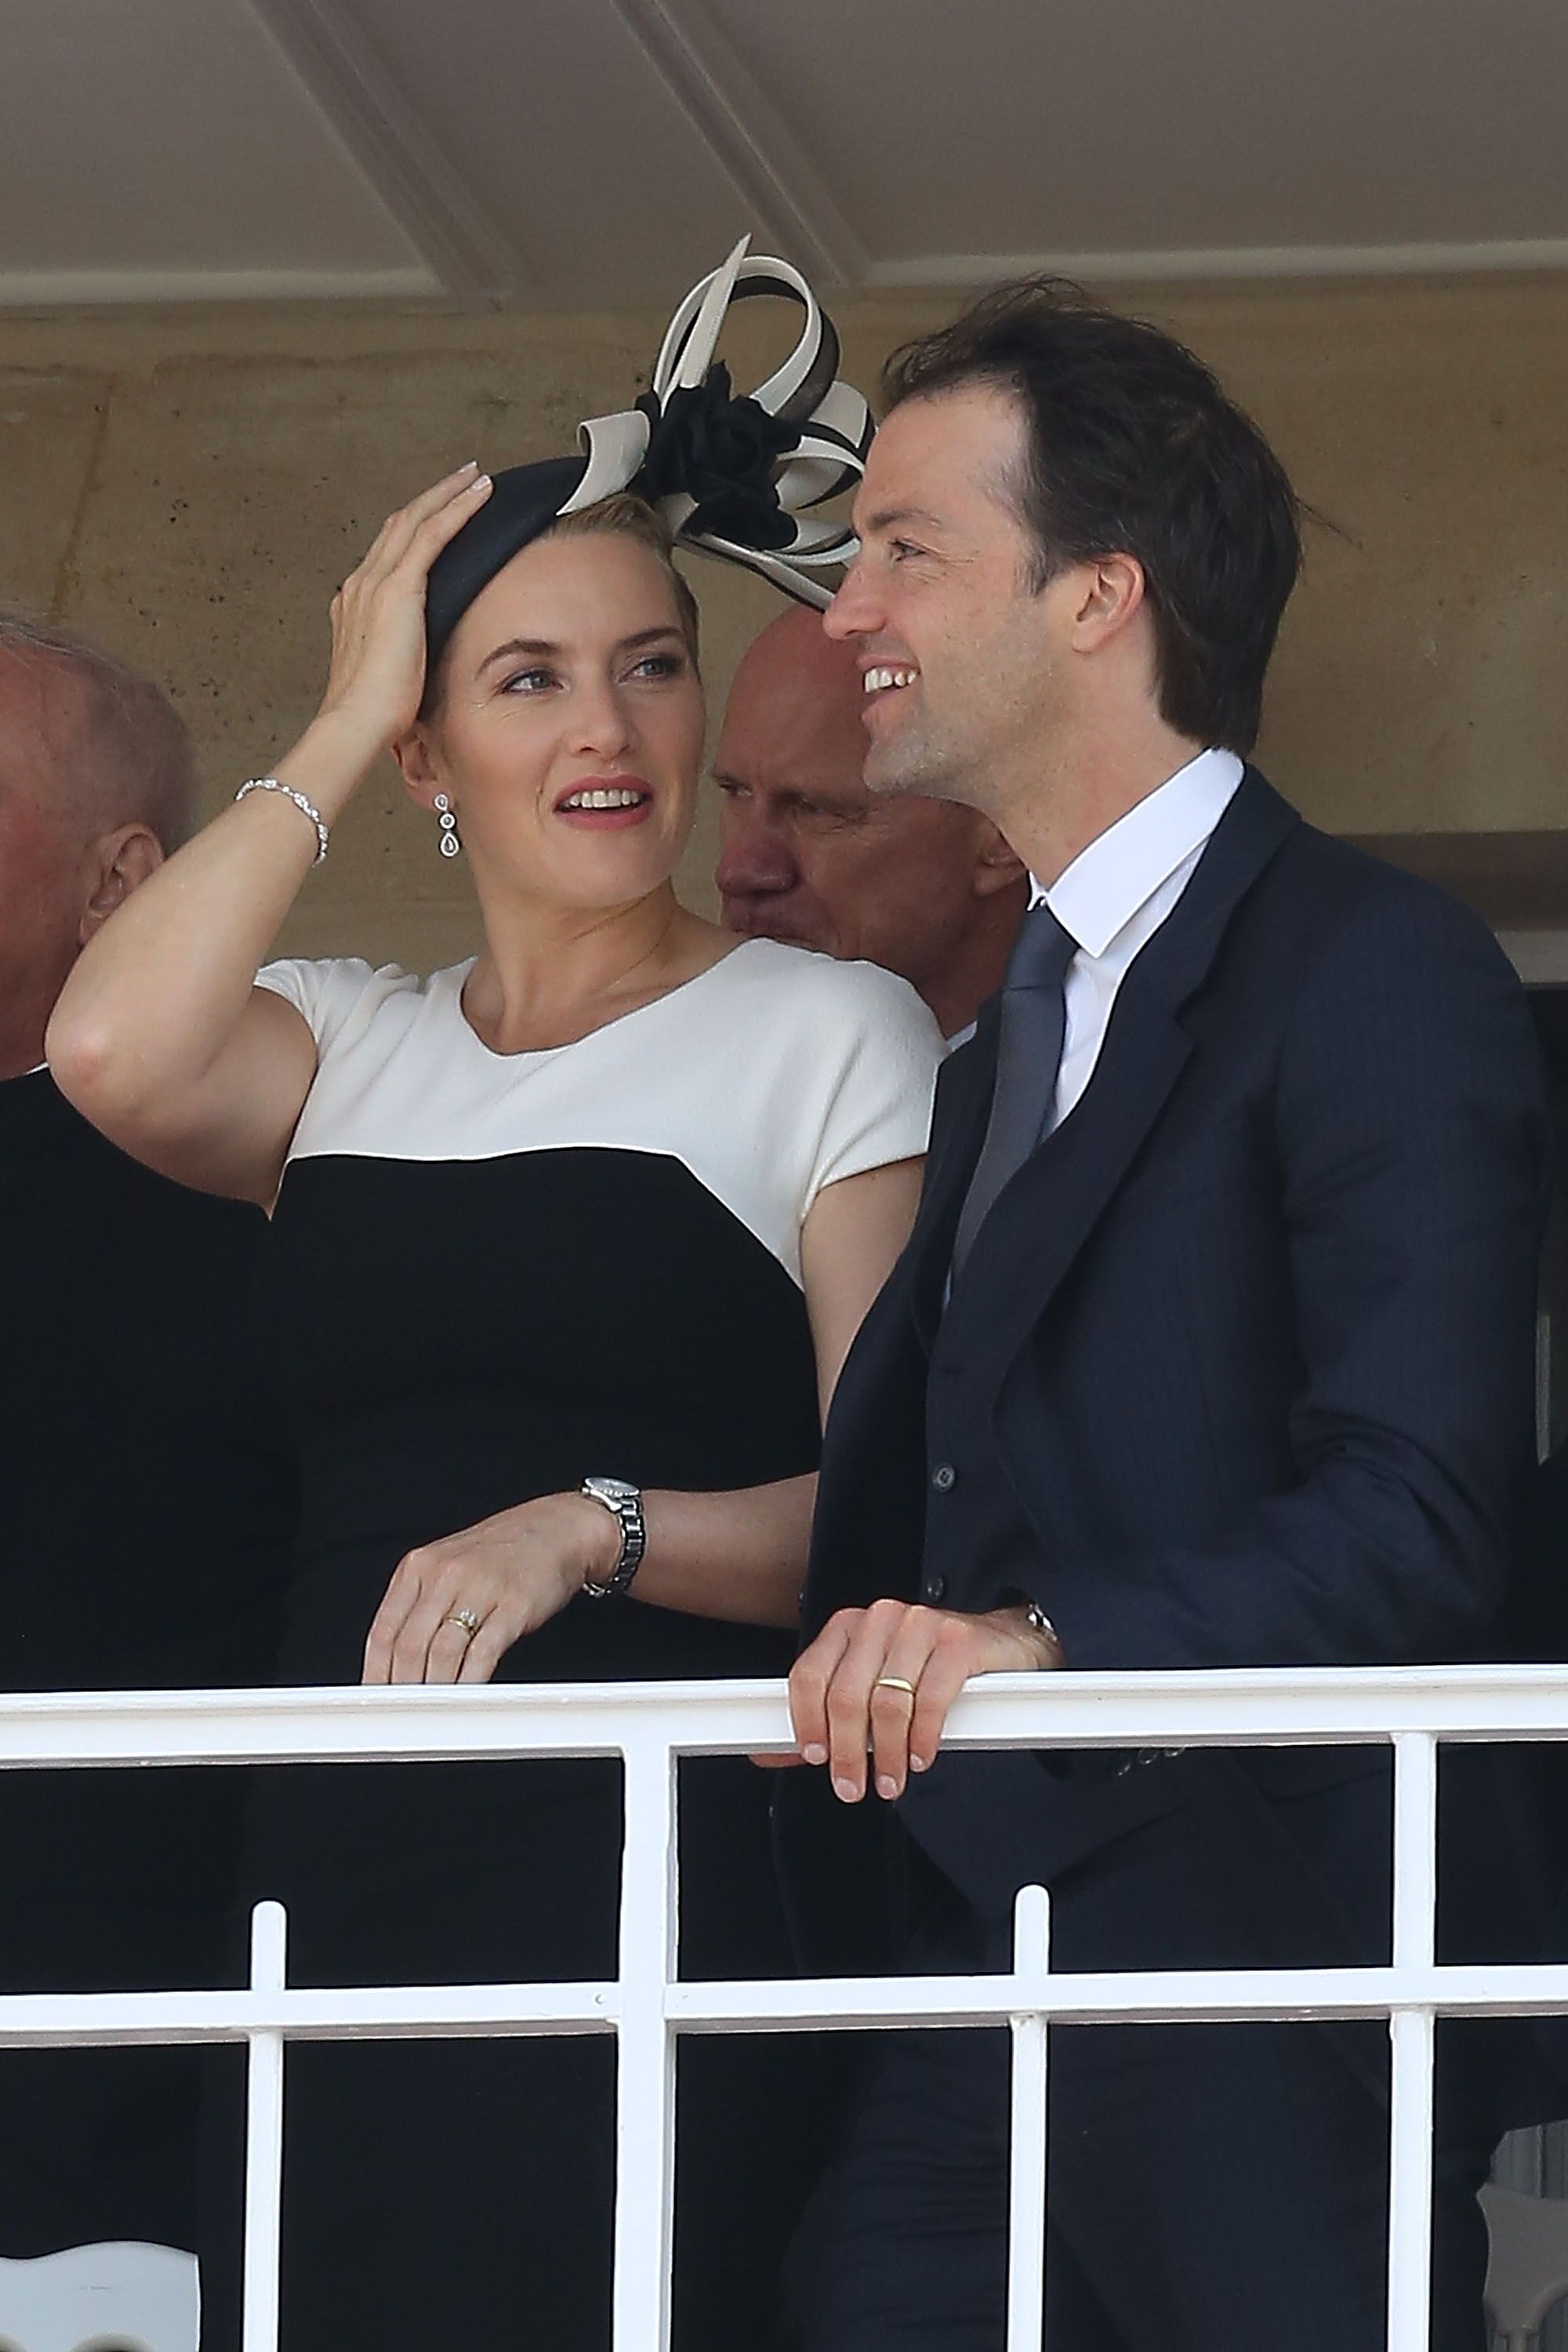 Kate Winslet and husband Ned Rocknroll at the 'Prix de Diane Longines 2014' in 2014 in Chantilly, France | Source: Getty Images